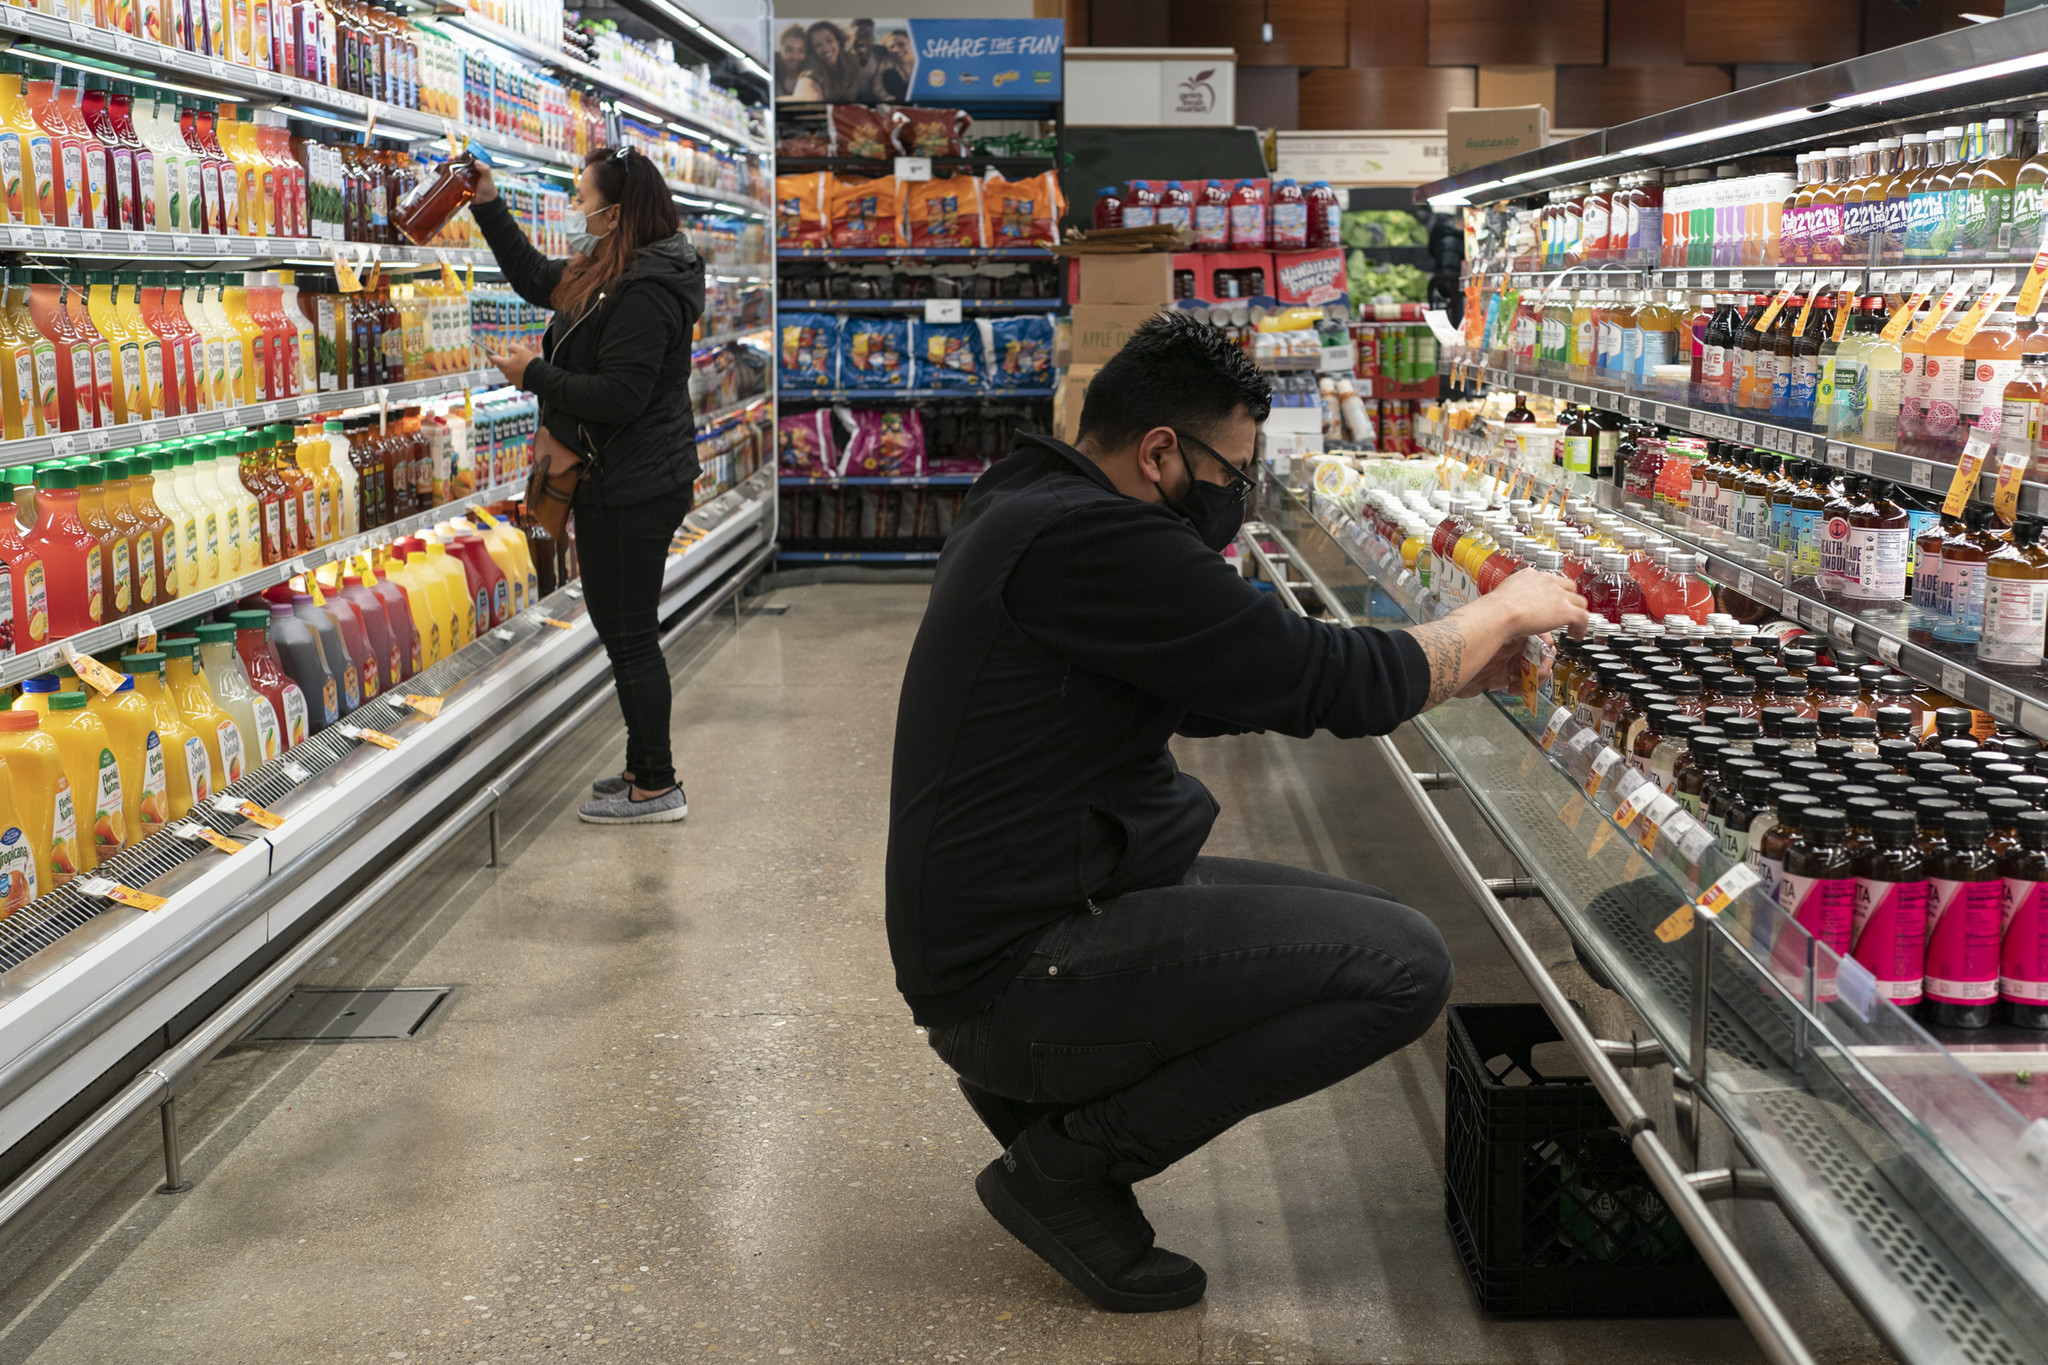 Shock and Lawsuits: Why Did Chicago’s Favorite Grocery Stores Close Overnight?